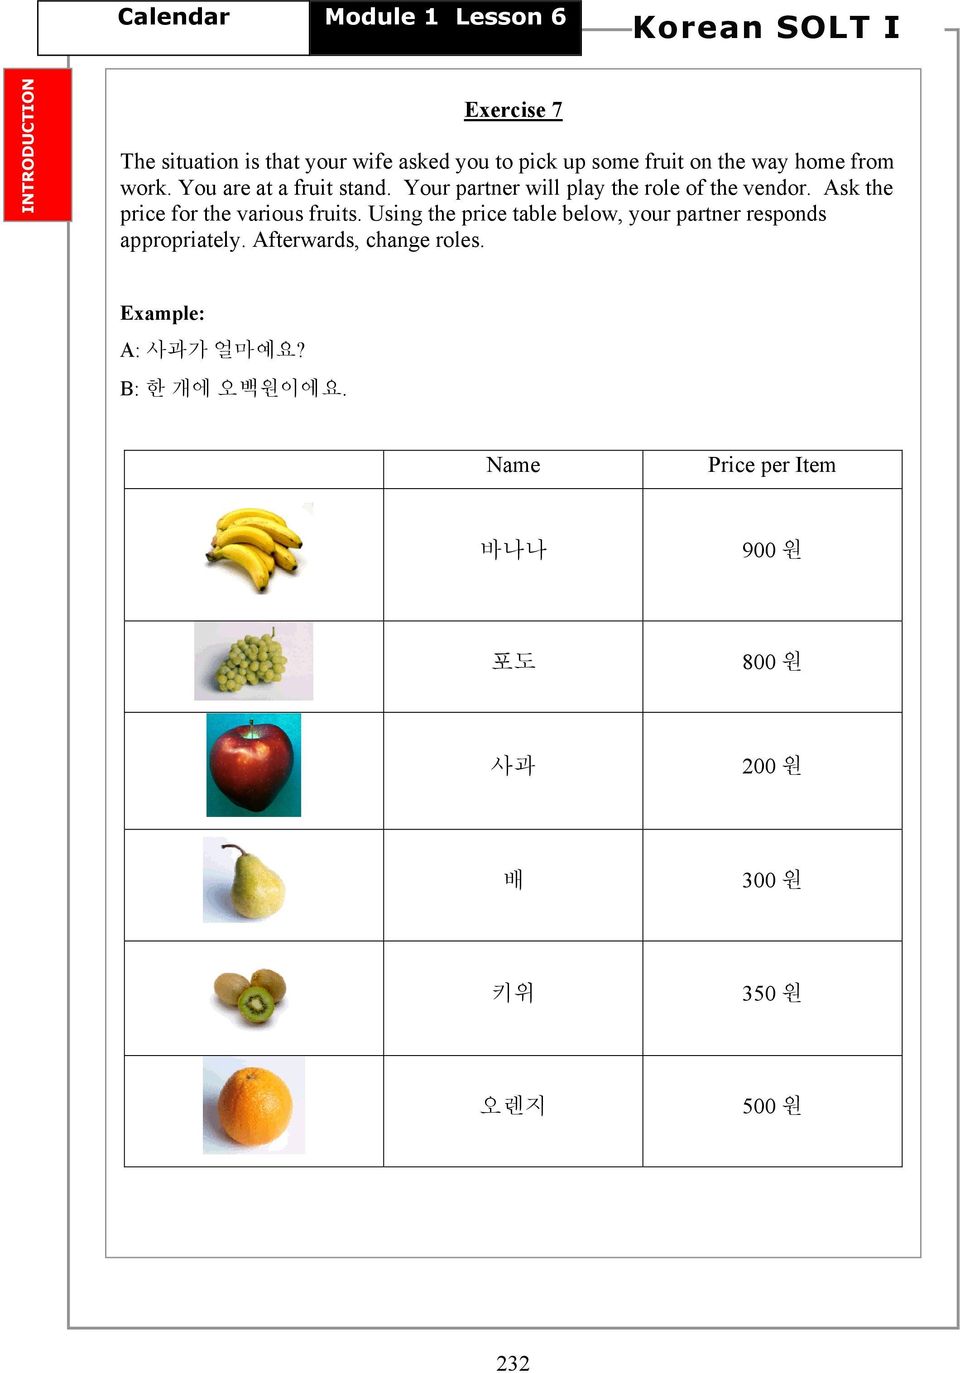 Ask the price for the various fruits. Using the price table below, your partner responds appropriately.